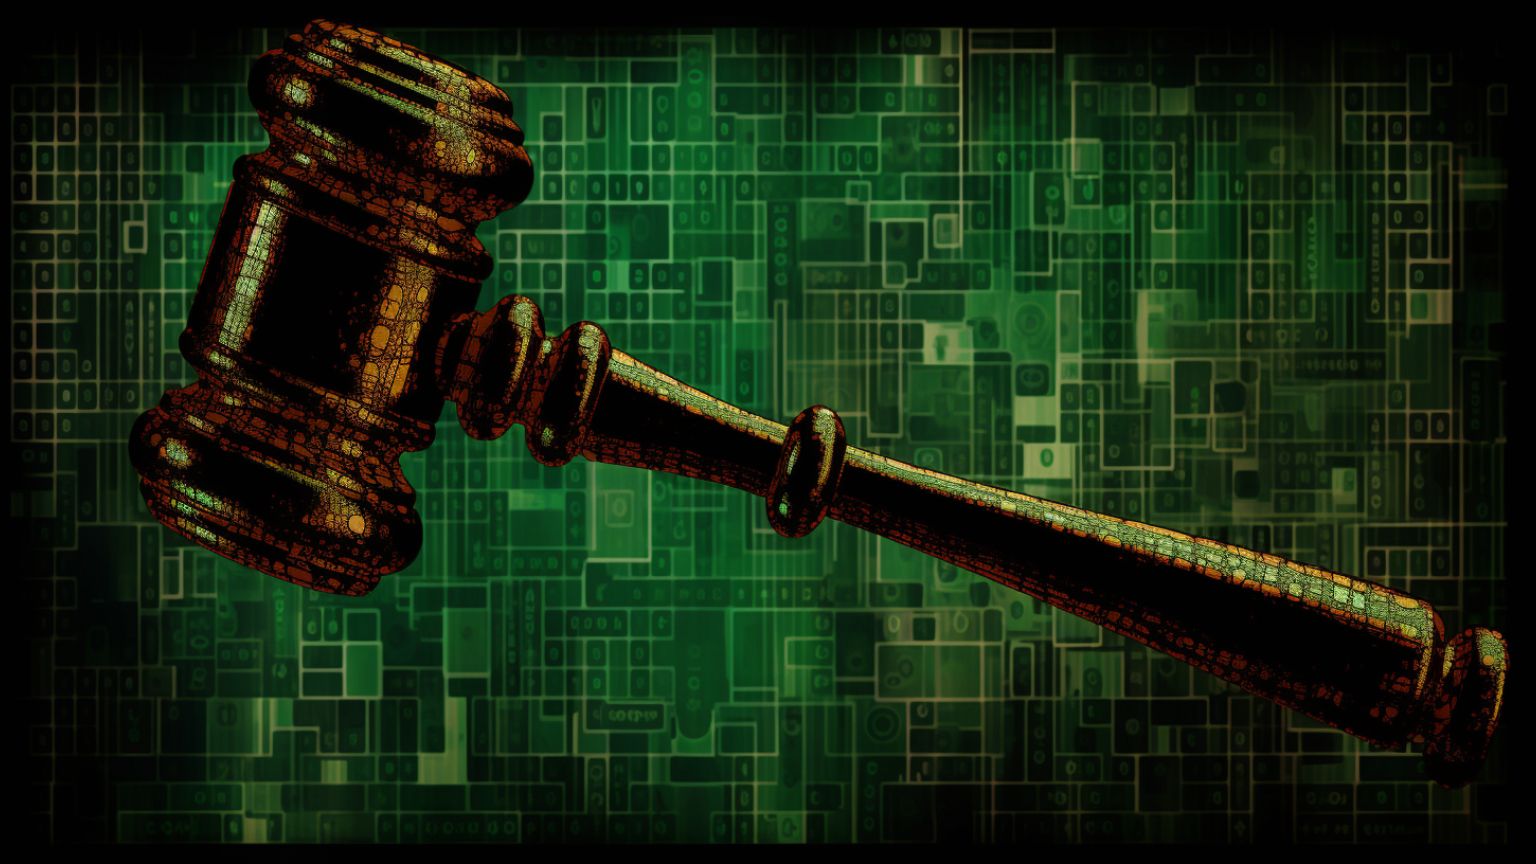 Fifth Circuit Expands Injunction Against Government Online Censorship To Include CISA